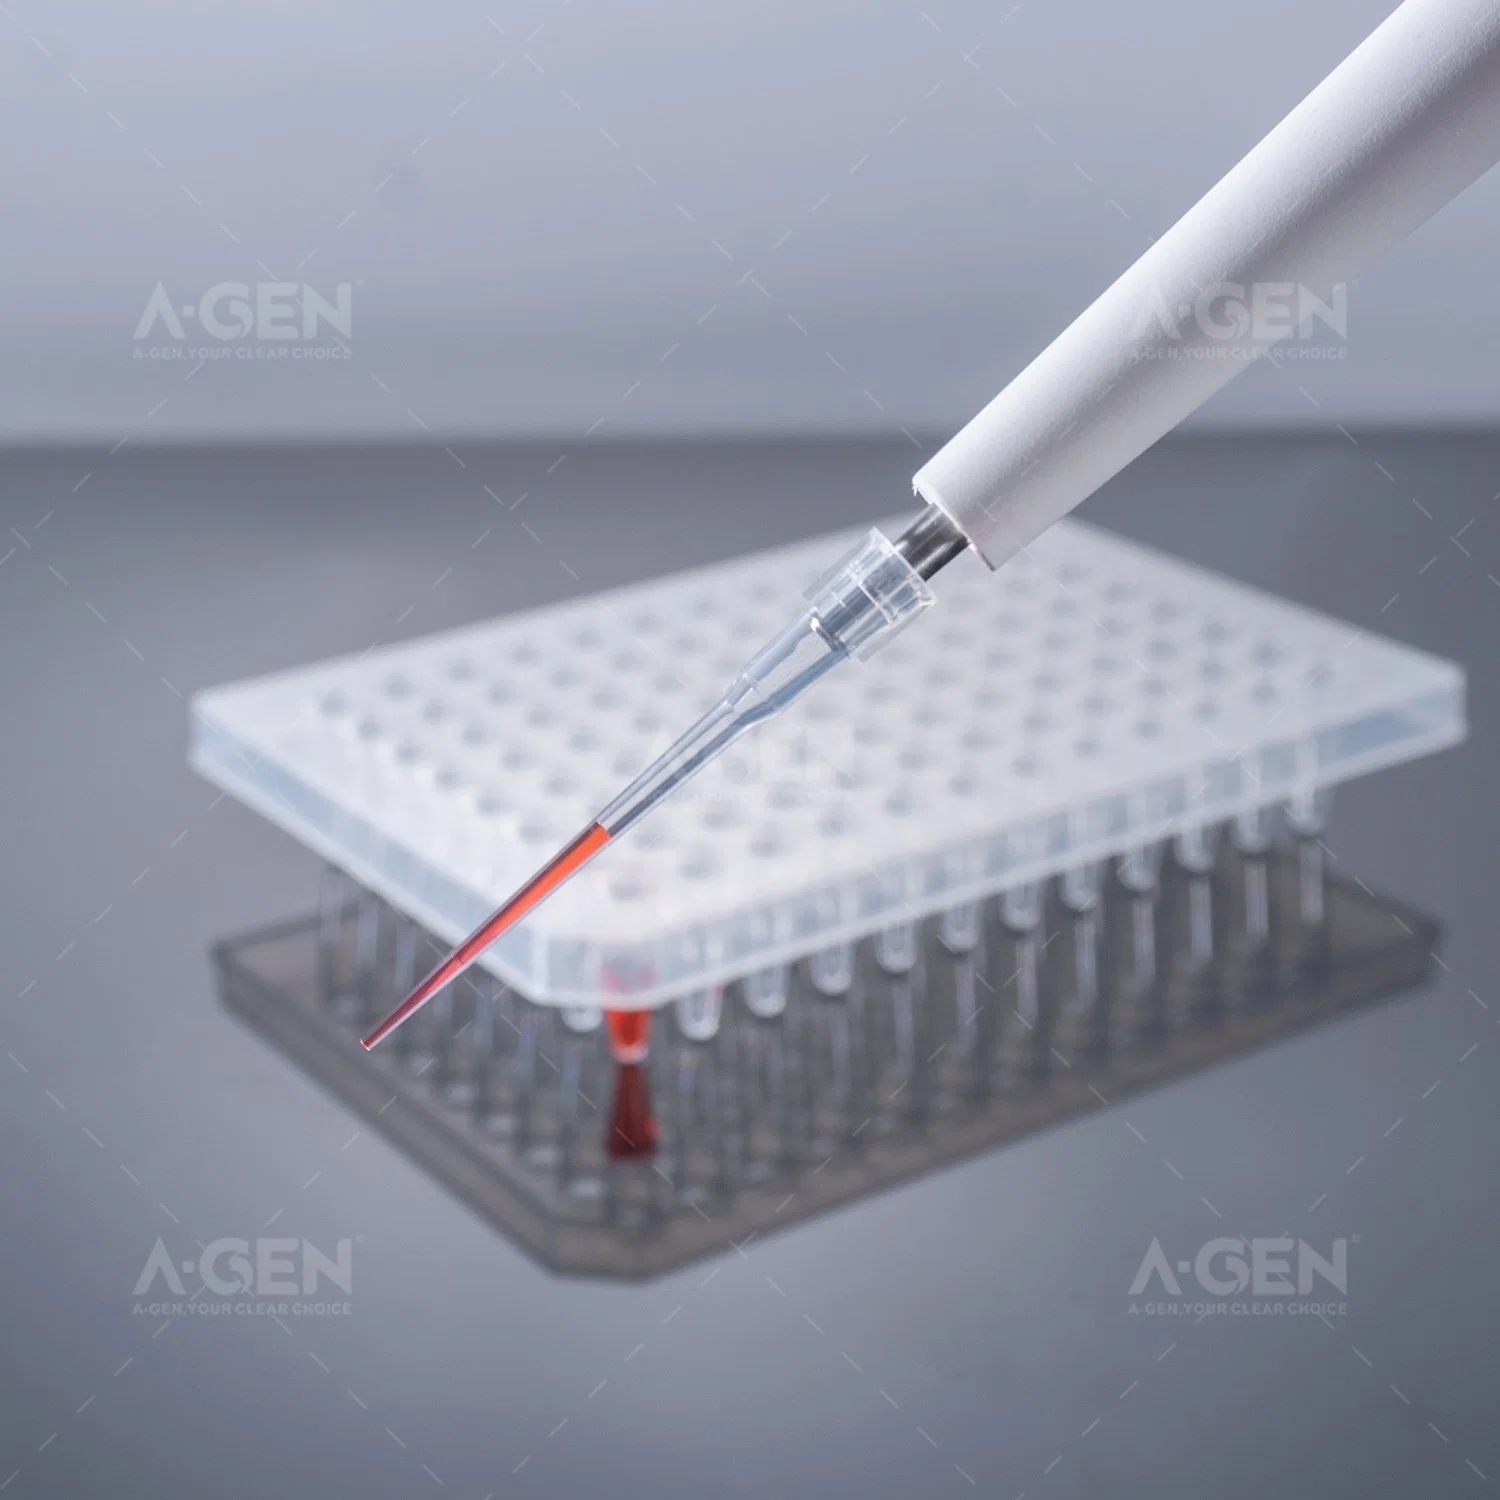 Universal Disposable Lab Consumables, Extra Long, Without Filter 10UL Low Residual Sterilized Pipette Tips in Rack